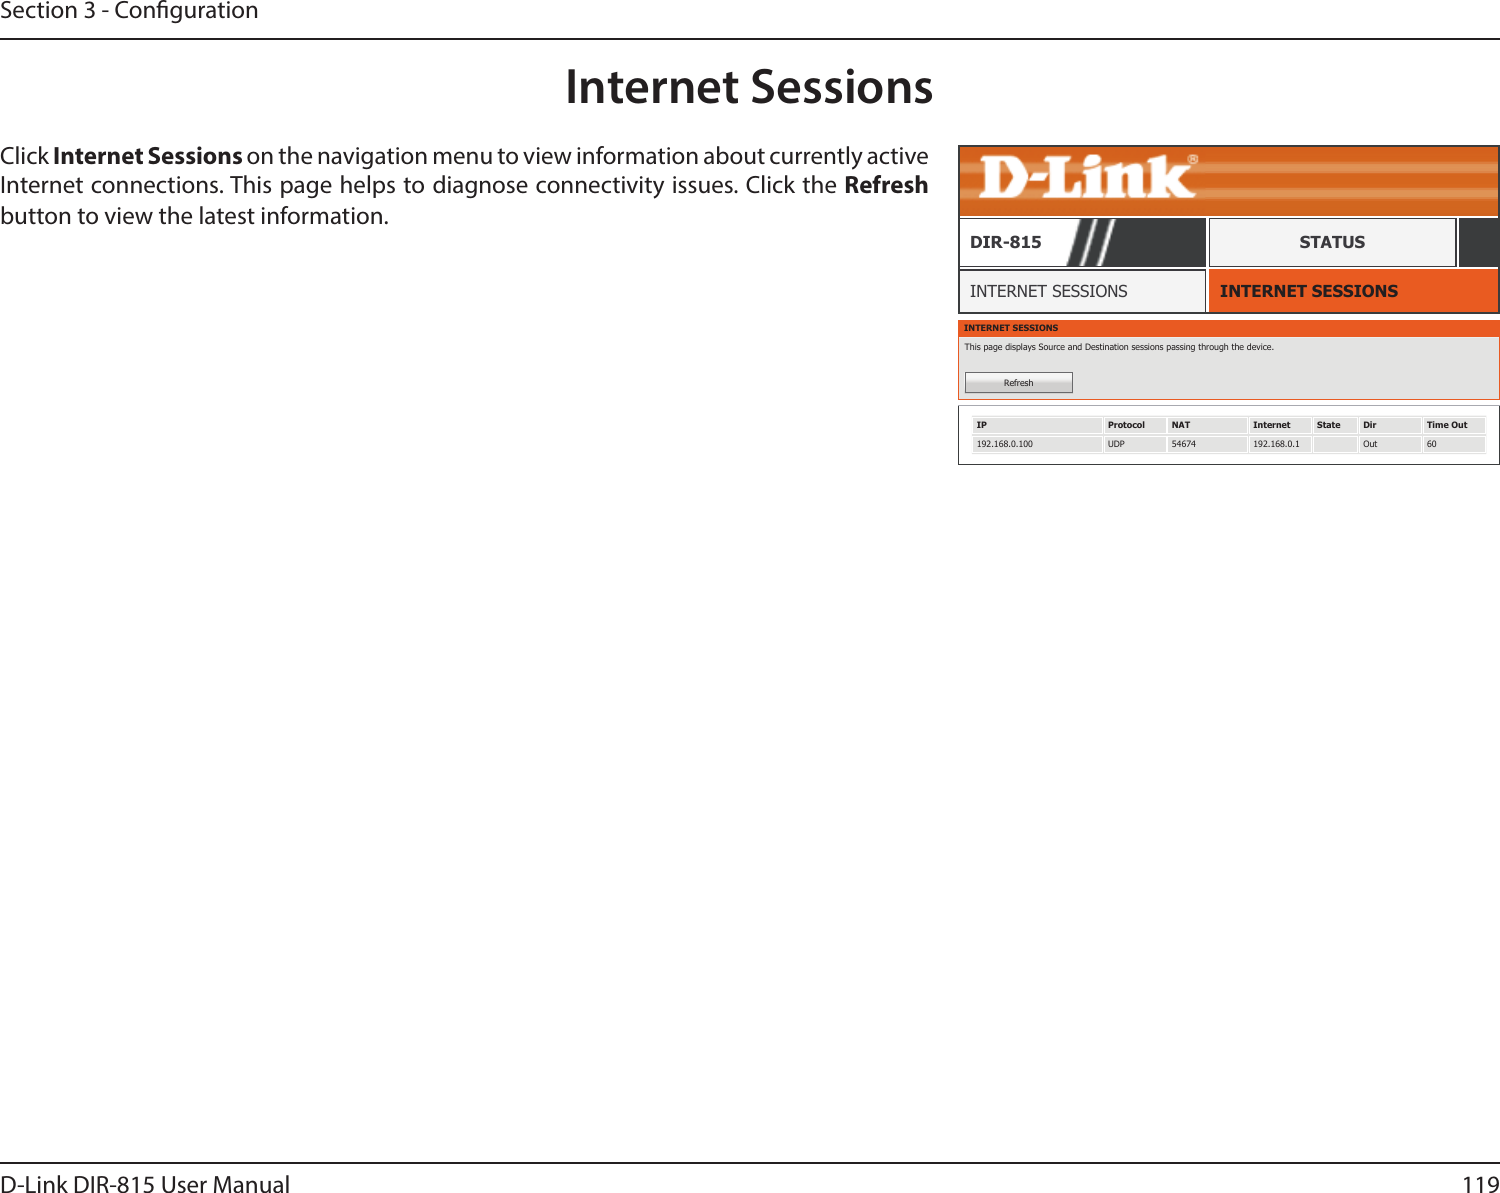 119D-Link DIR-815 User ManualSection 3 - CongurationInternet SessionsINTERNET SESSIONSINTERNET SESSIONSDIR-815 STATUSClick Internet Sessions on the navigation menu to view information about currently active Internet connections. This page helps to diagnose connectivity issues. Click the Refresh button to view the latest information.INTERNET SESSIONSThis page displays Source and Destination sessions passing through the device.RefreshIP Protocol NAT Internet State Dir Time Out192.168.0.100 UDP 54674 192.168.0.1 Out 60